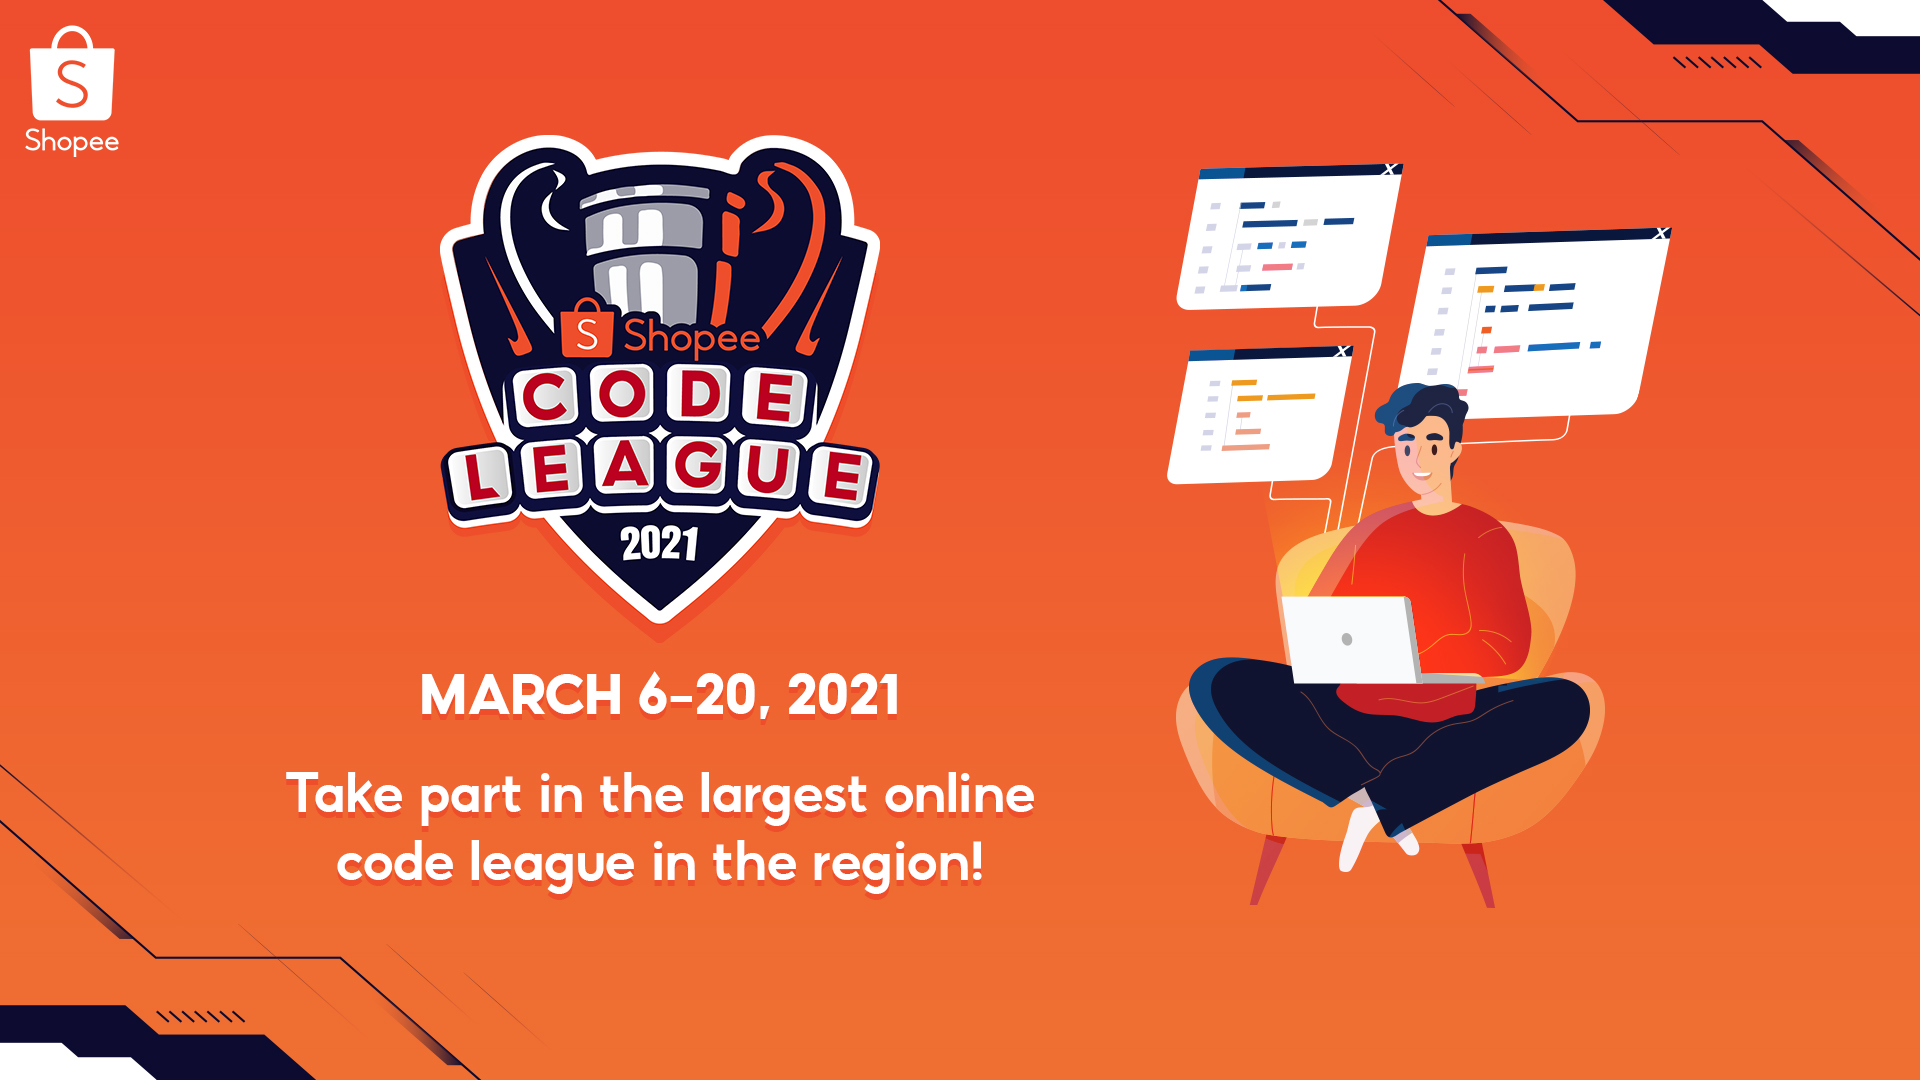 Shopee Continues to Nurture Tech Talent, Prepare Workforces for the Future with the Return of Shopee Code League